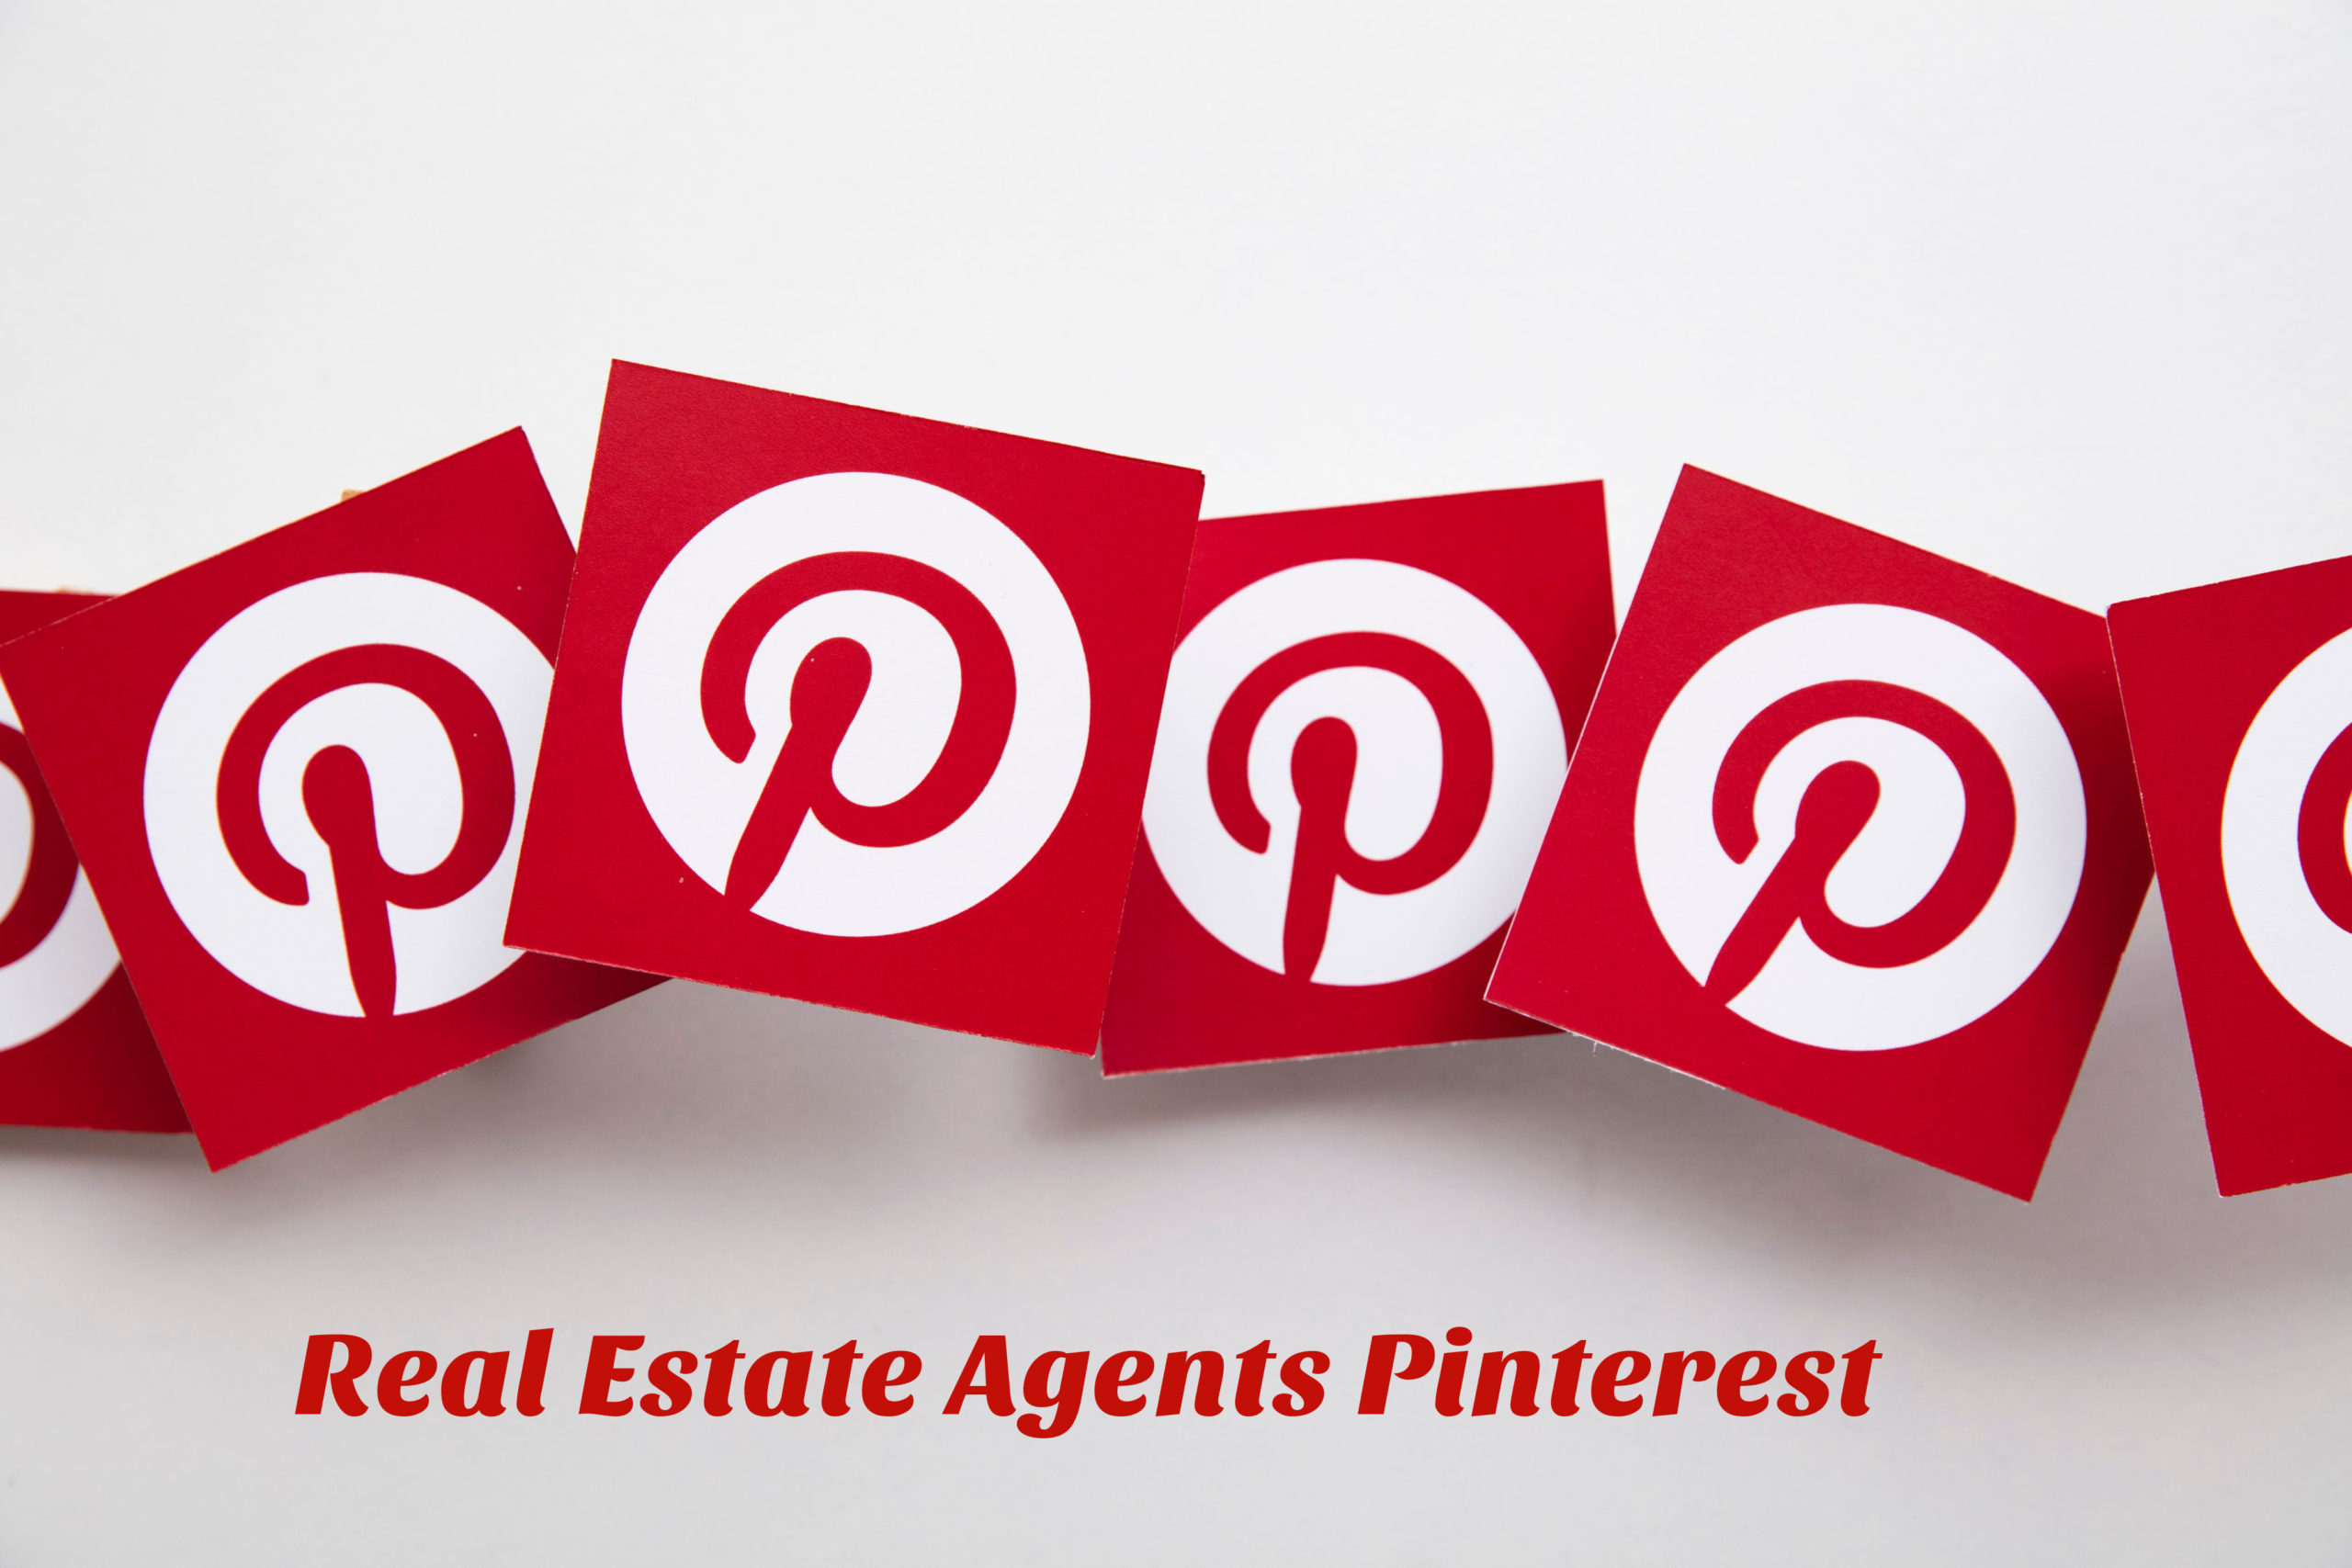 What Are Benefits of Using Pinterest for Real Estate Agents